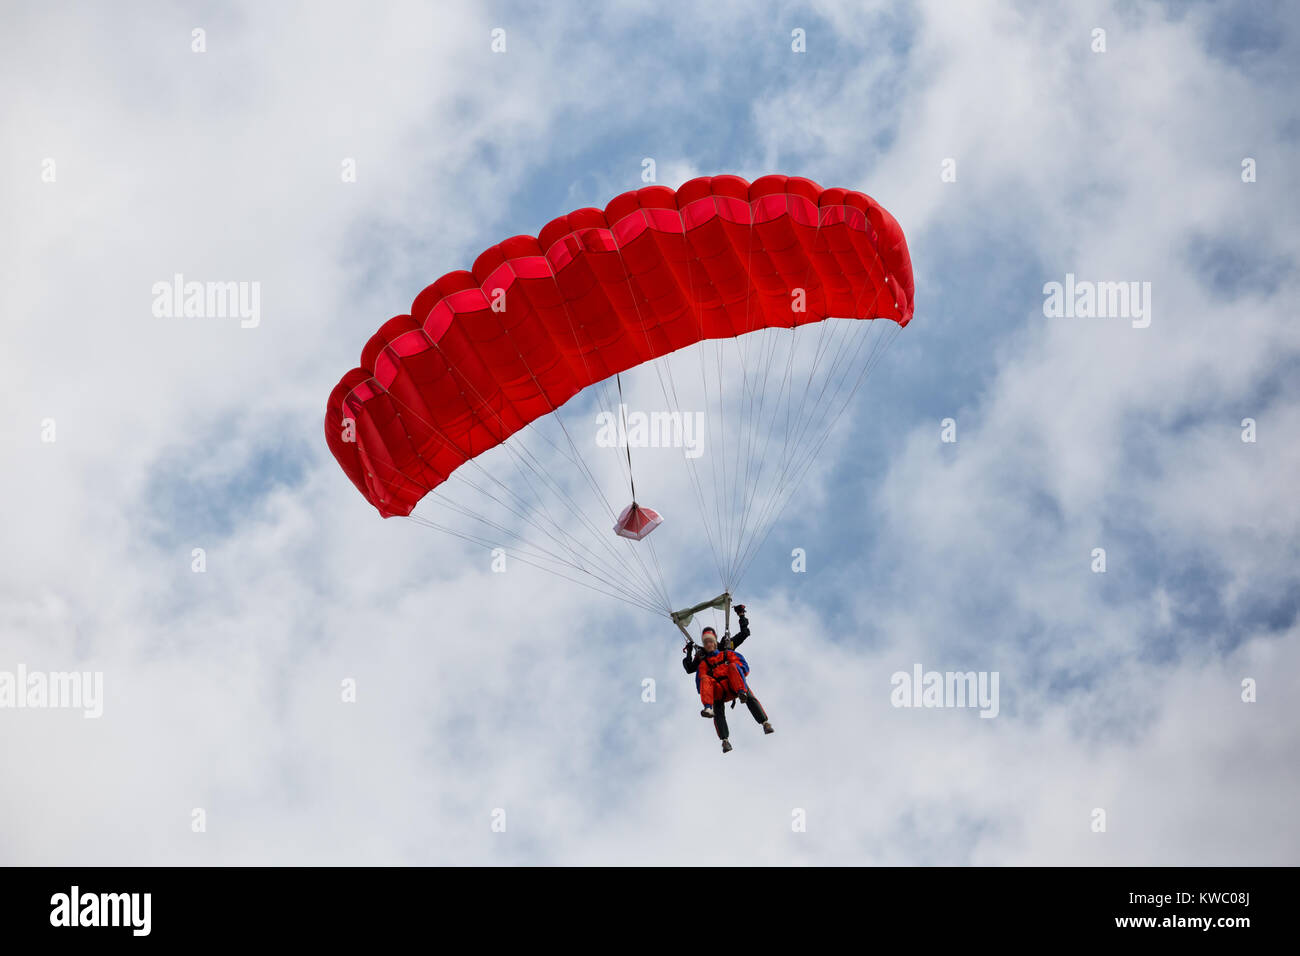 Parachuter descending with a red parachute Stock Photo